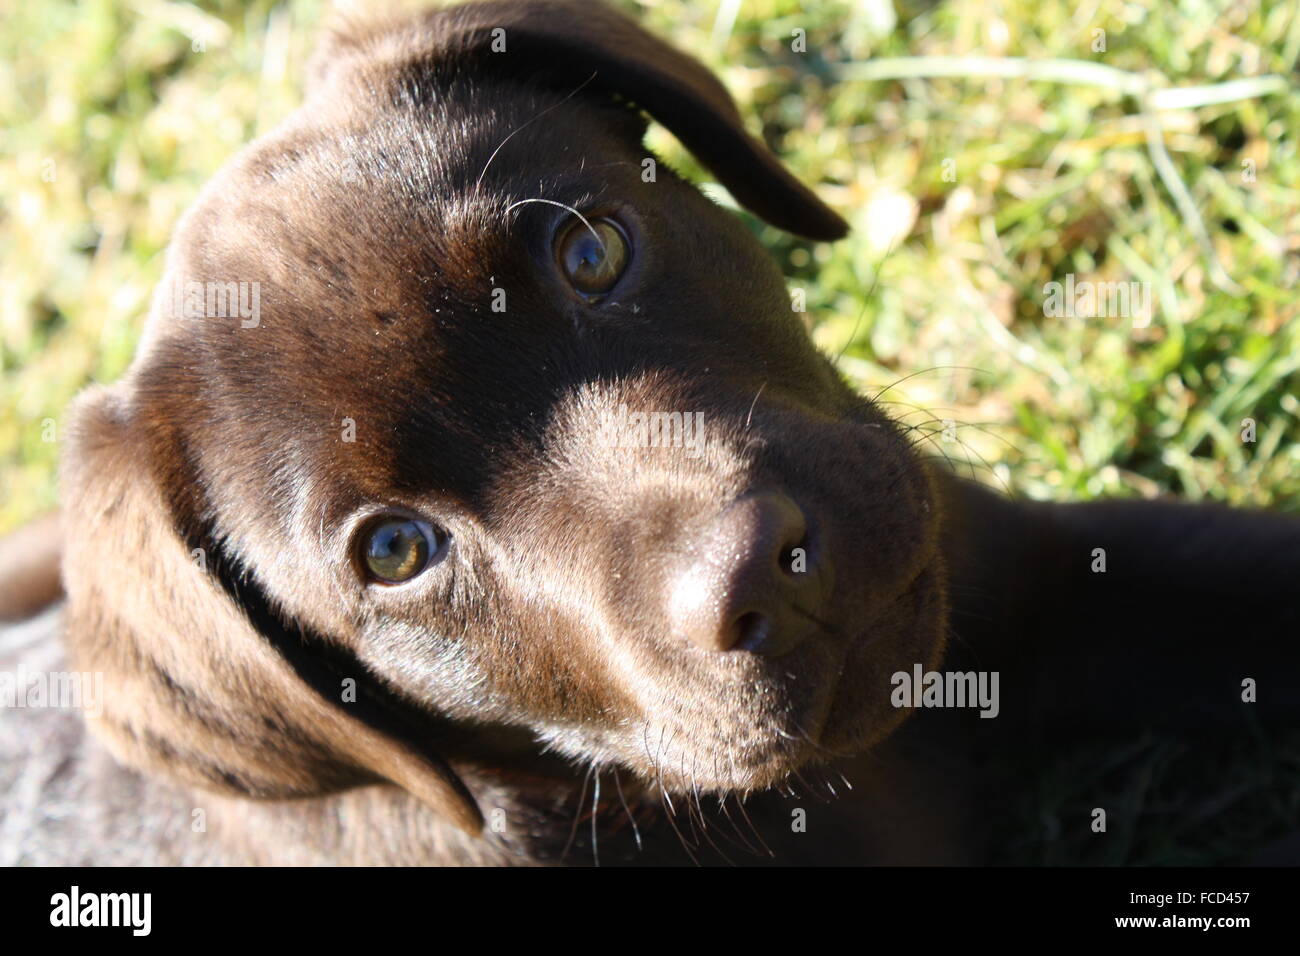 Portrait Of A Puppy In The Grass Stock Photo